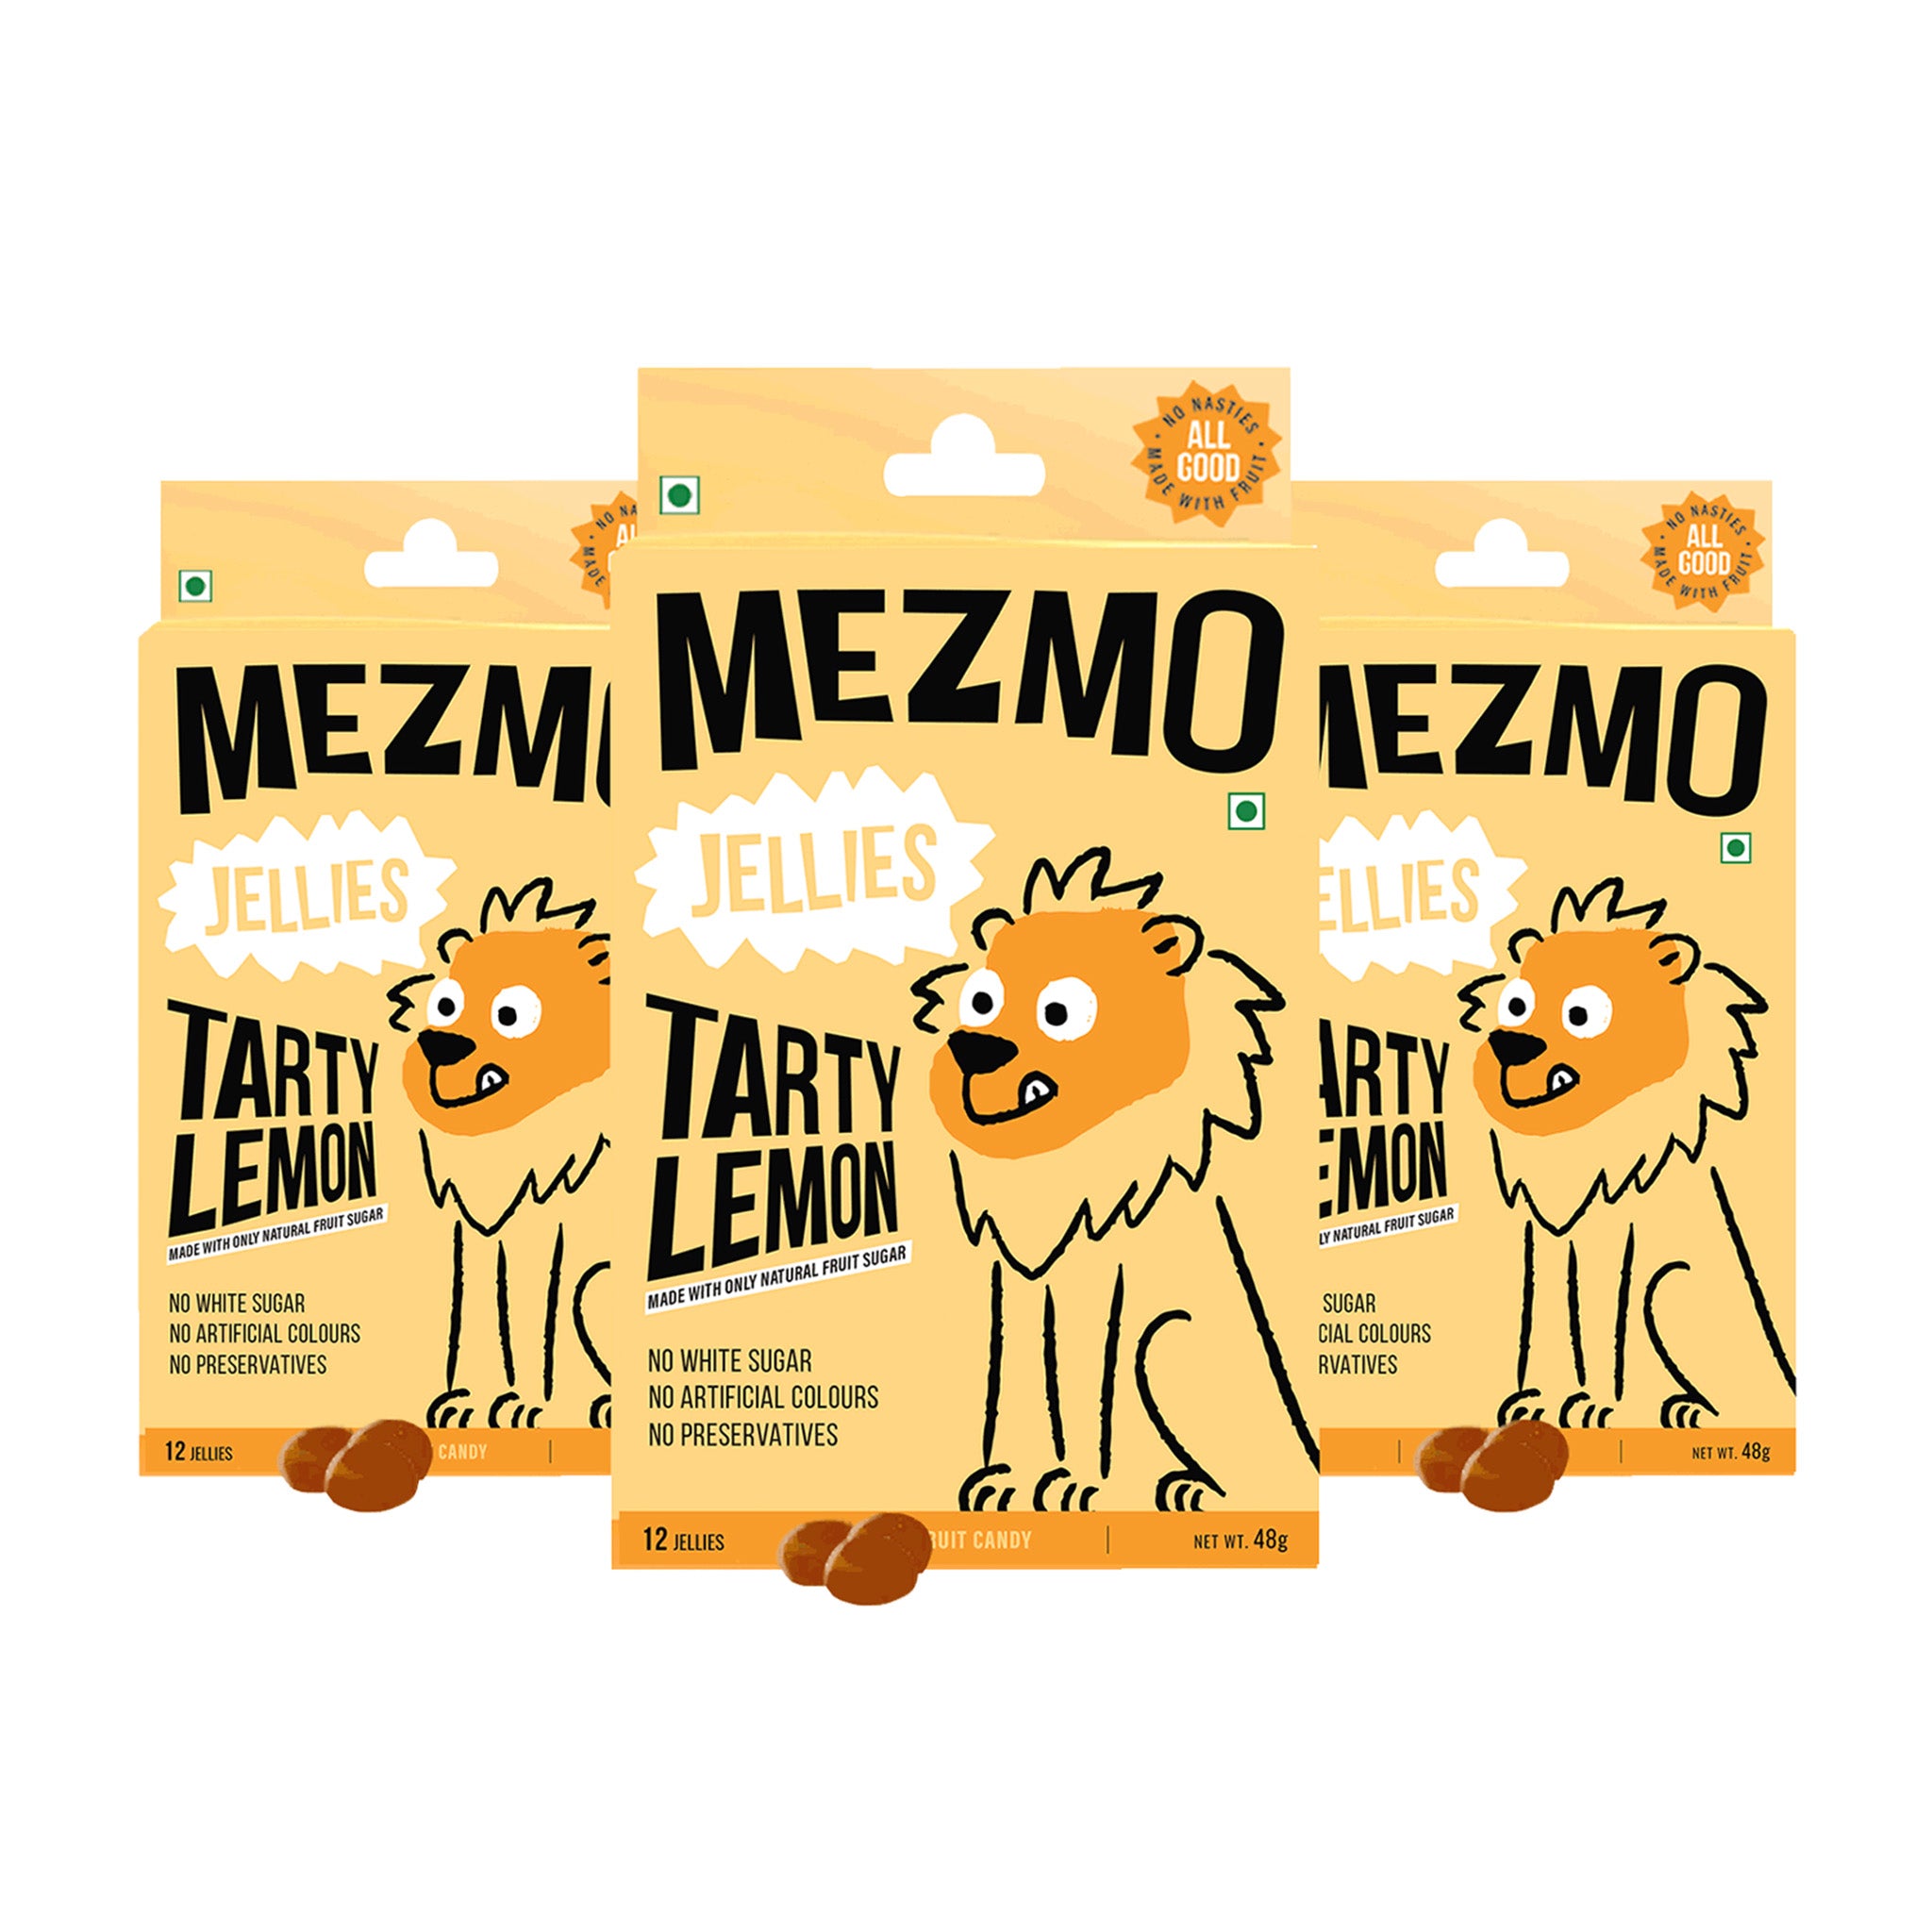 Mezmo Candy Tarty Lemon Pack of 3 ( 36 Jellies)